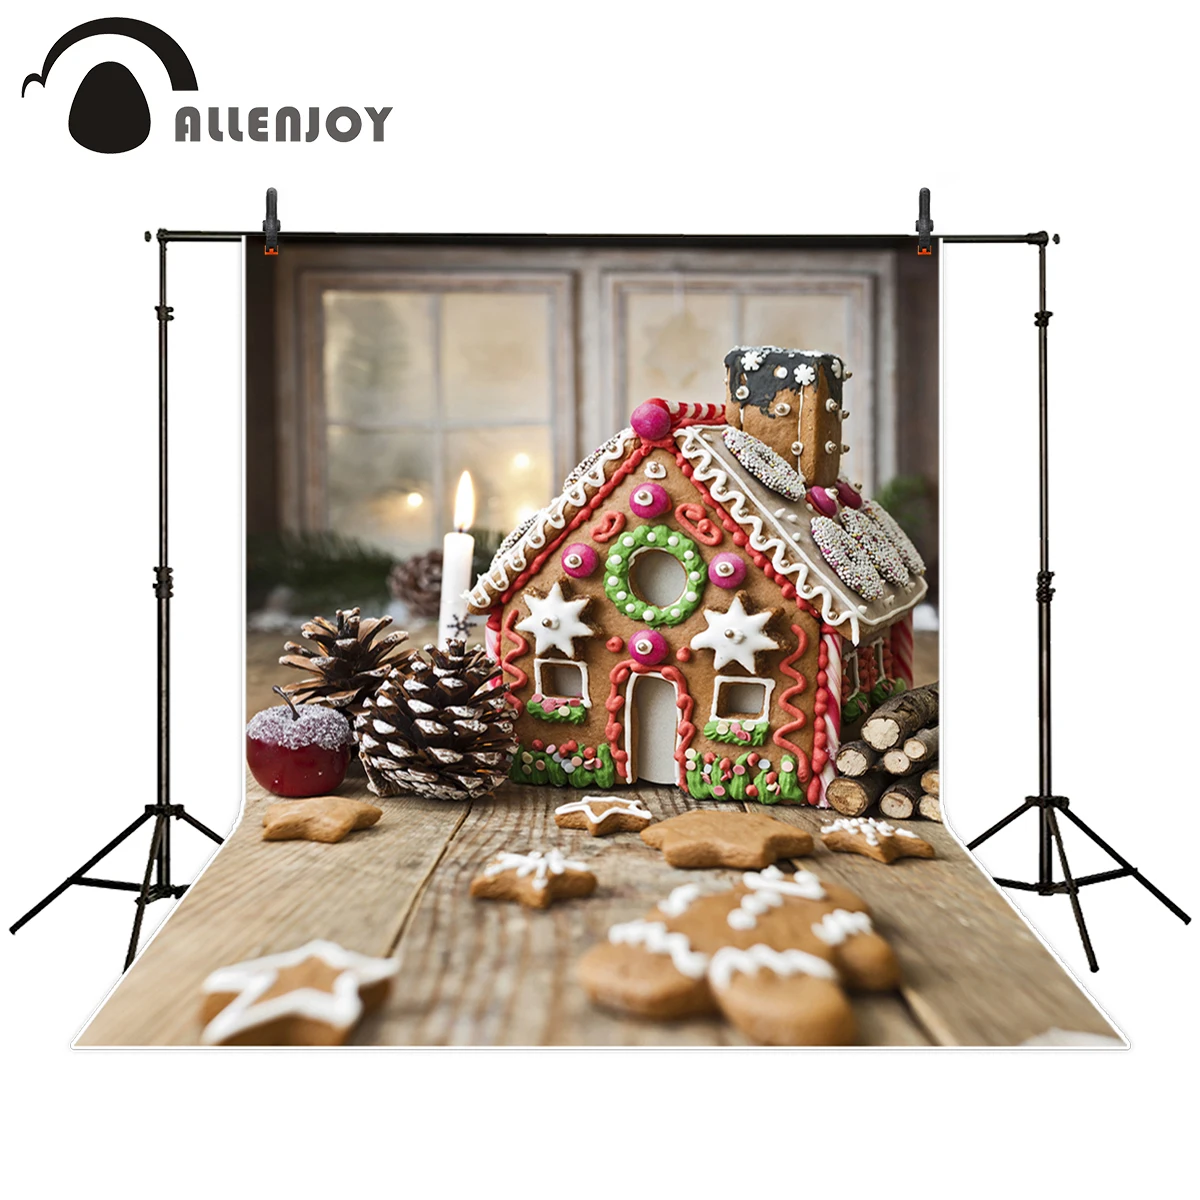 

Allenjoy Christmas candy photography backdrop gingerbread house kids window professional background photobooth photocall